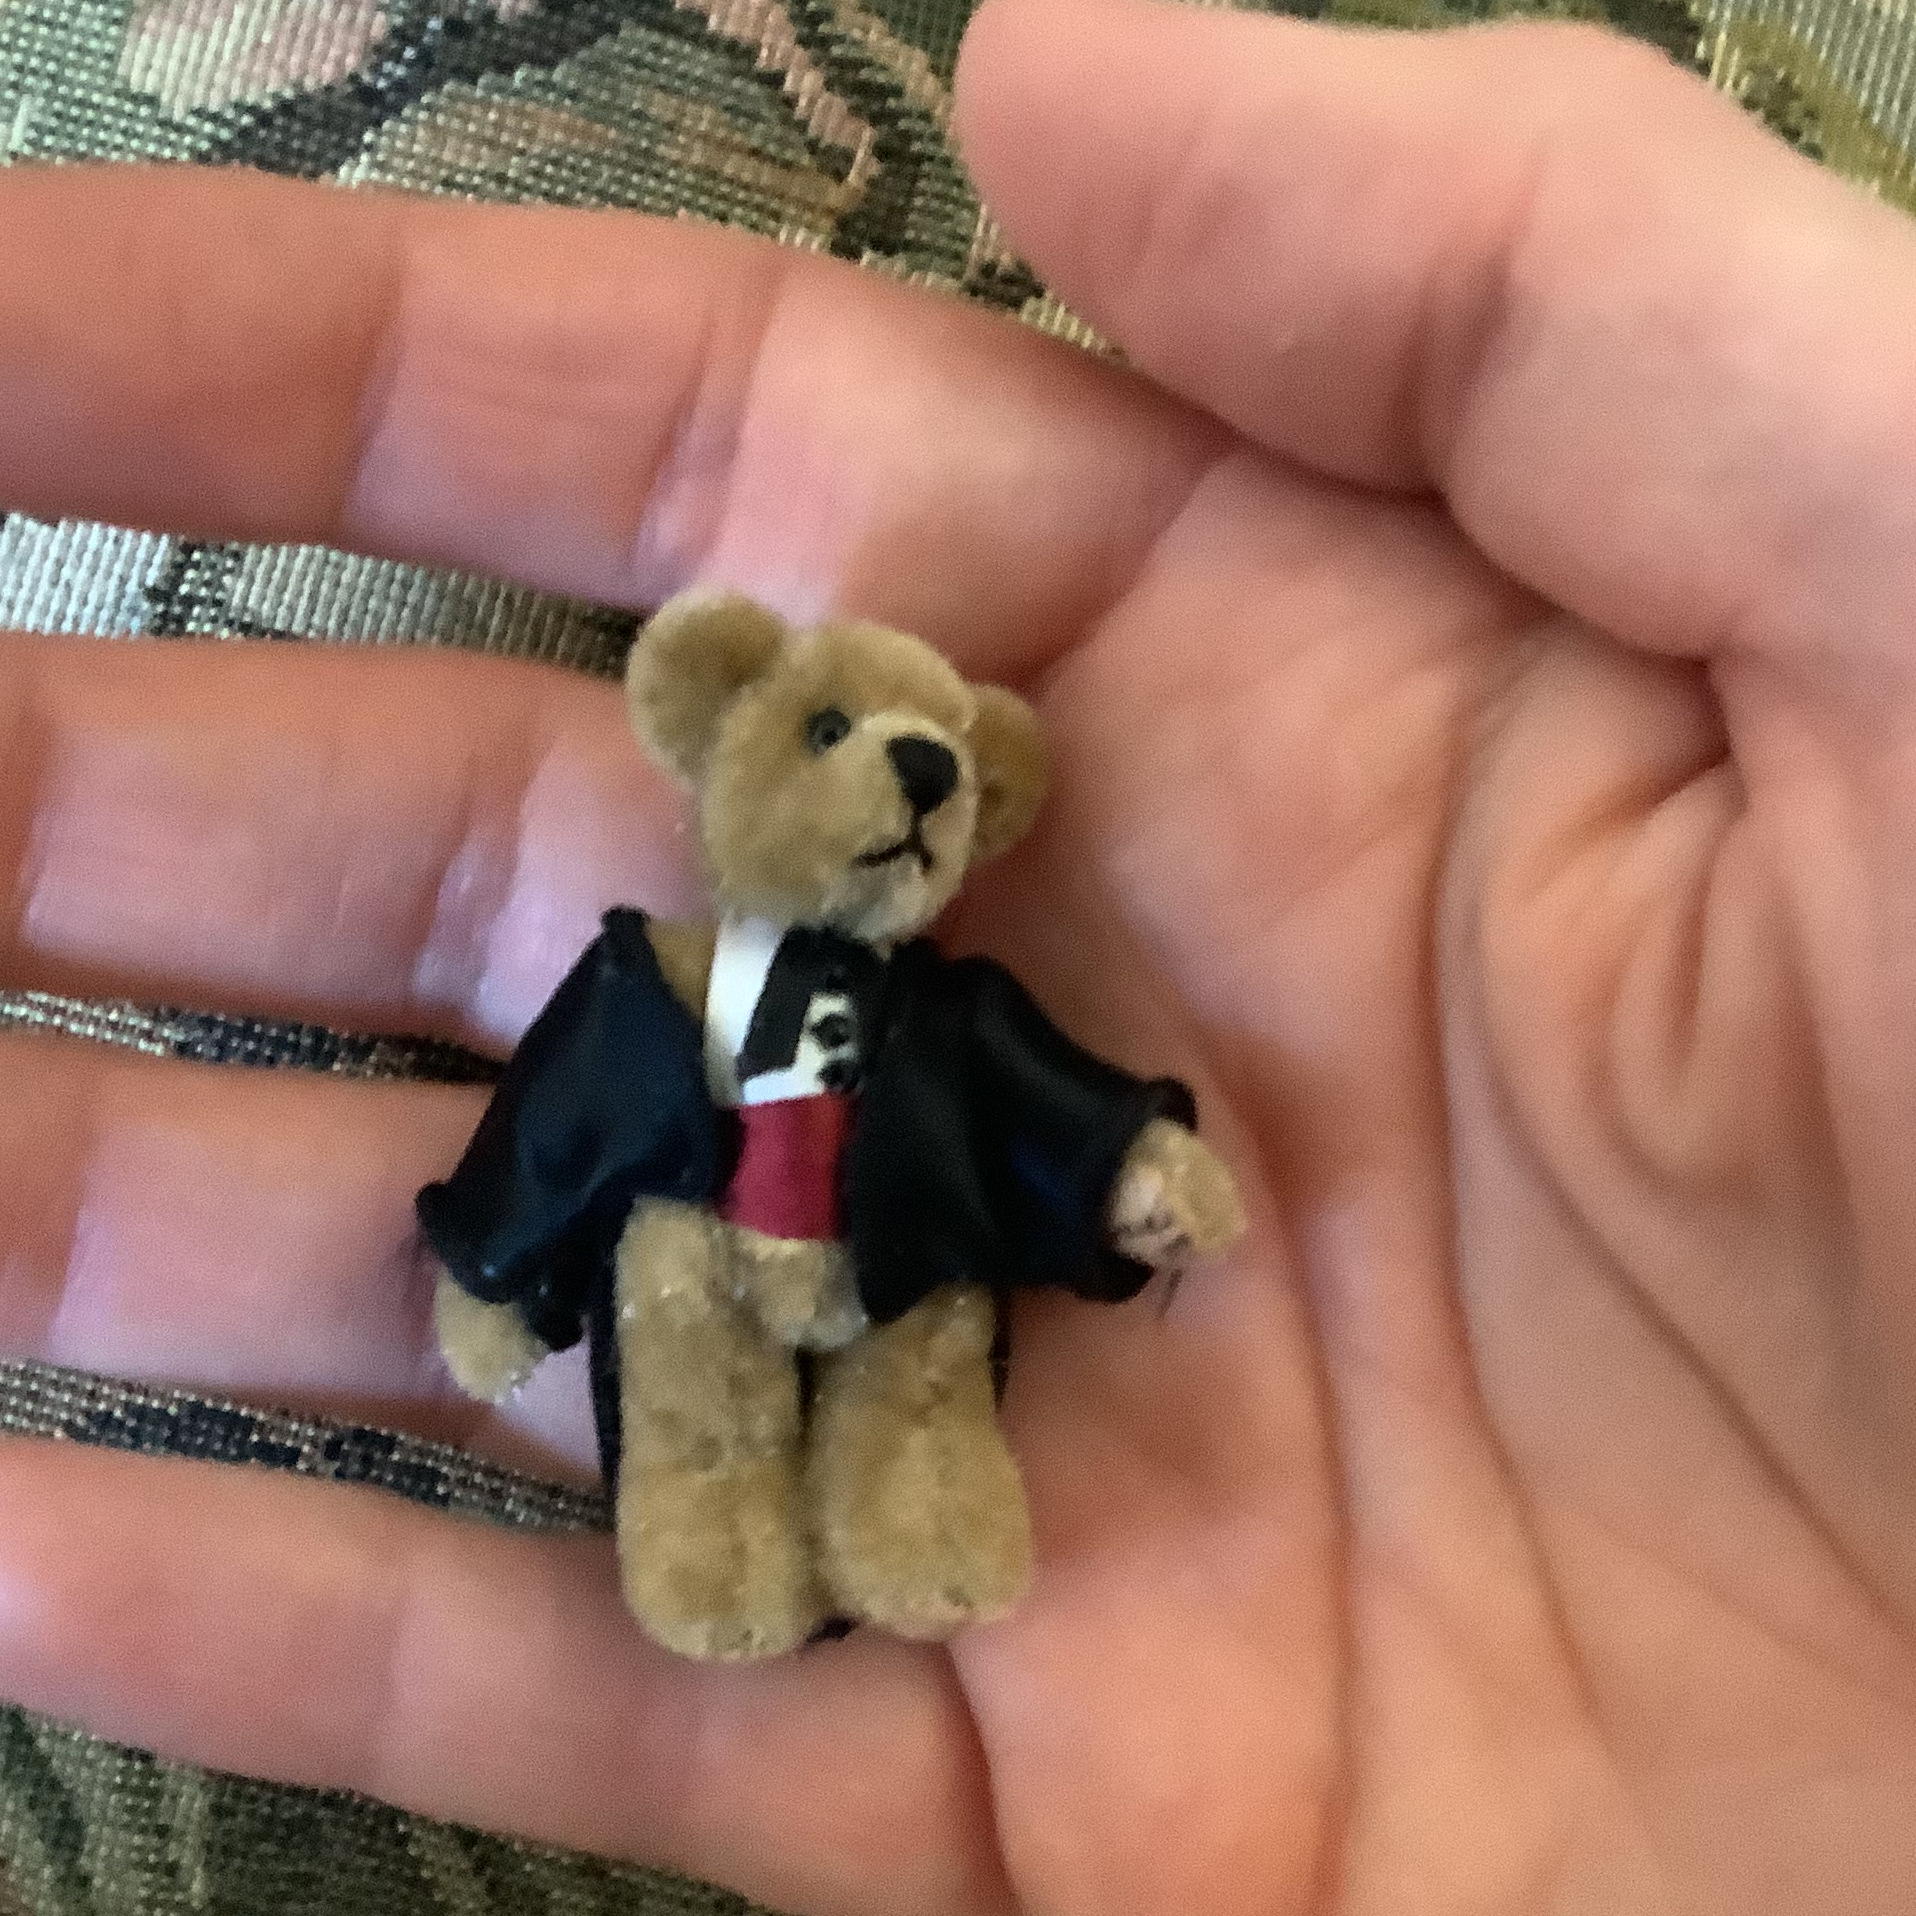 small teddy bear doll in suit jacket and tie with jointed arms and legs